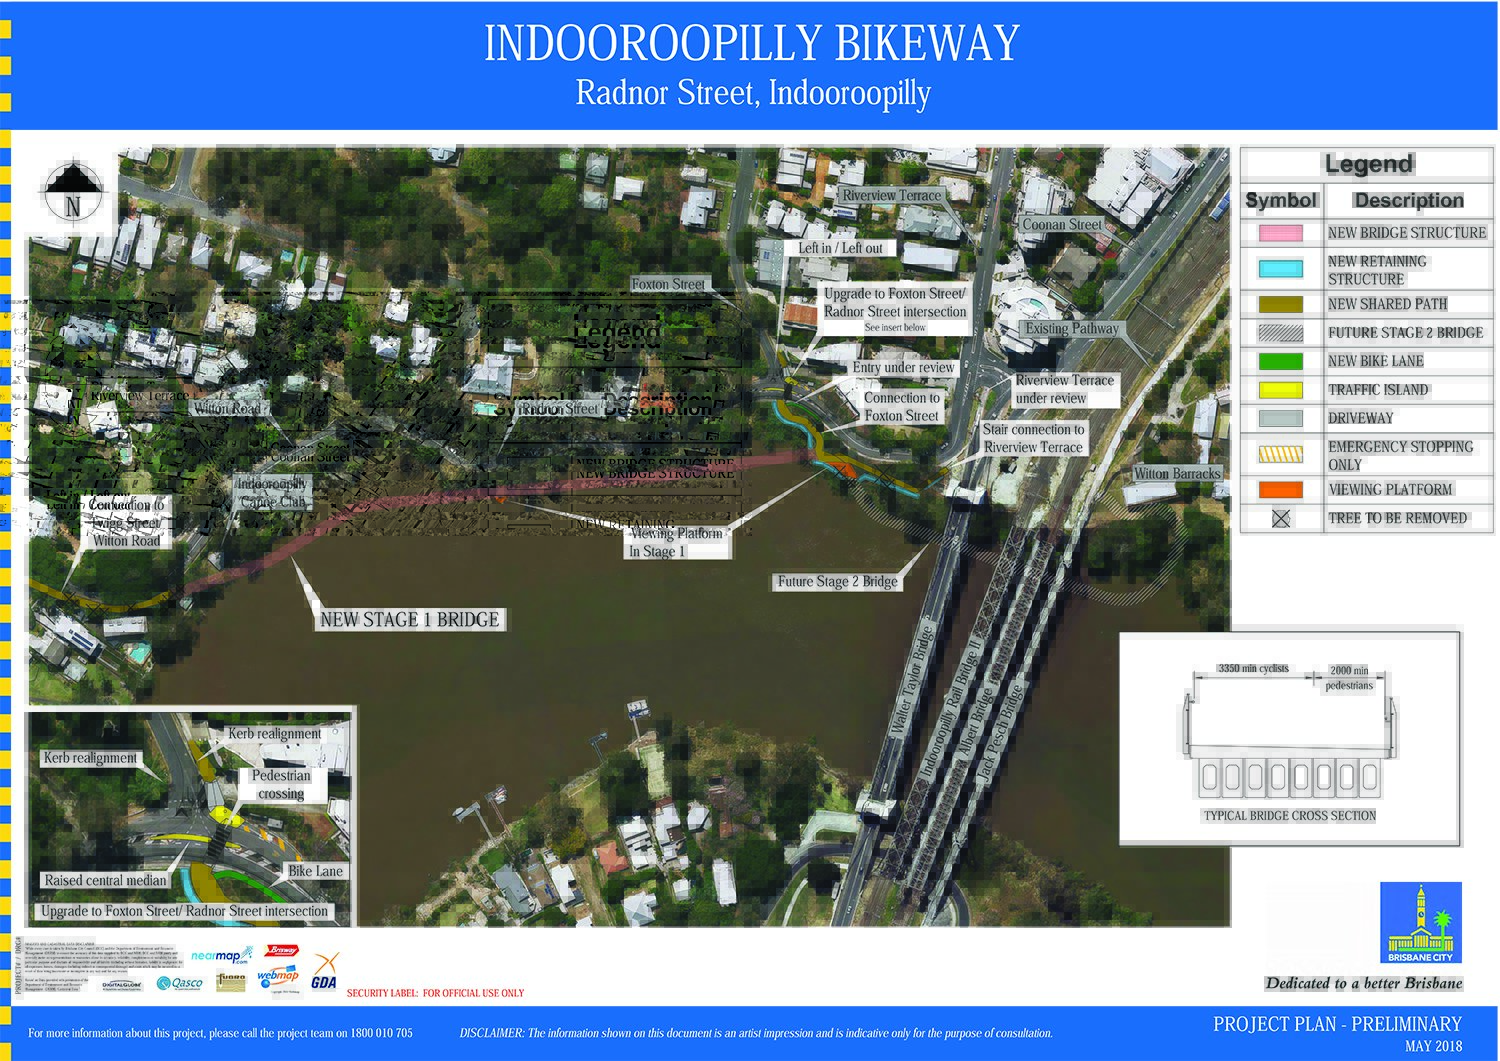 20180514-indooroopilly-bikeway-project-plan-may-2018 copy